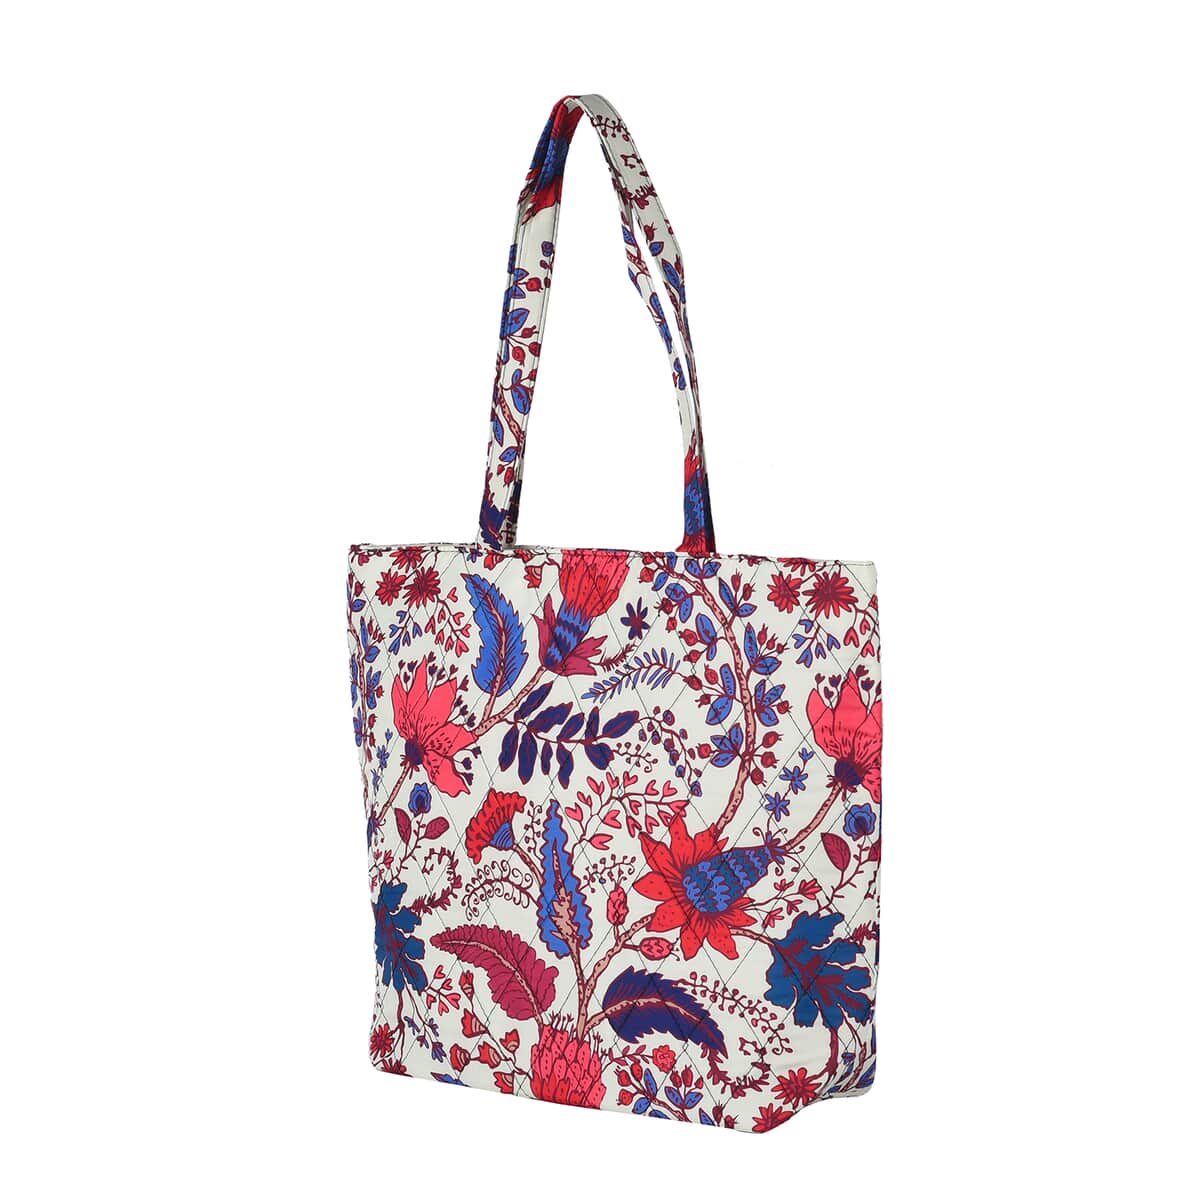 Beige and Mulit Color Flower Pattern Tote Bag (17"x4.5"x13.5") image number 6